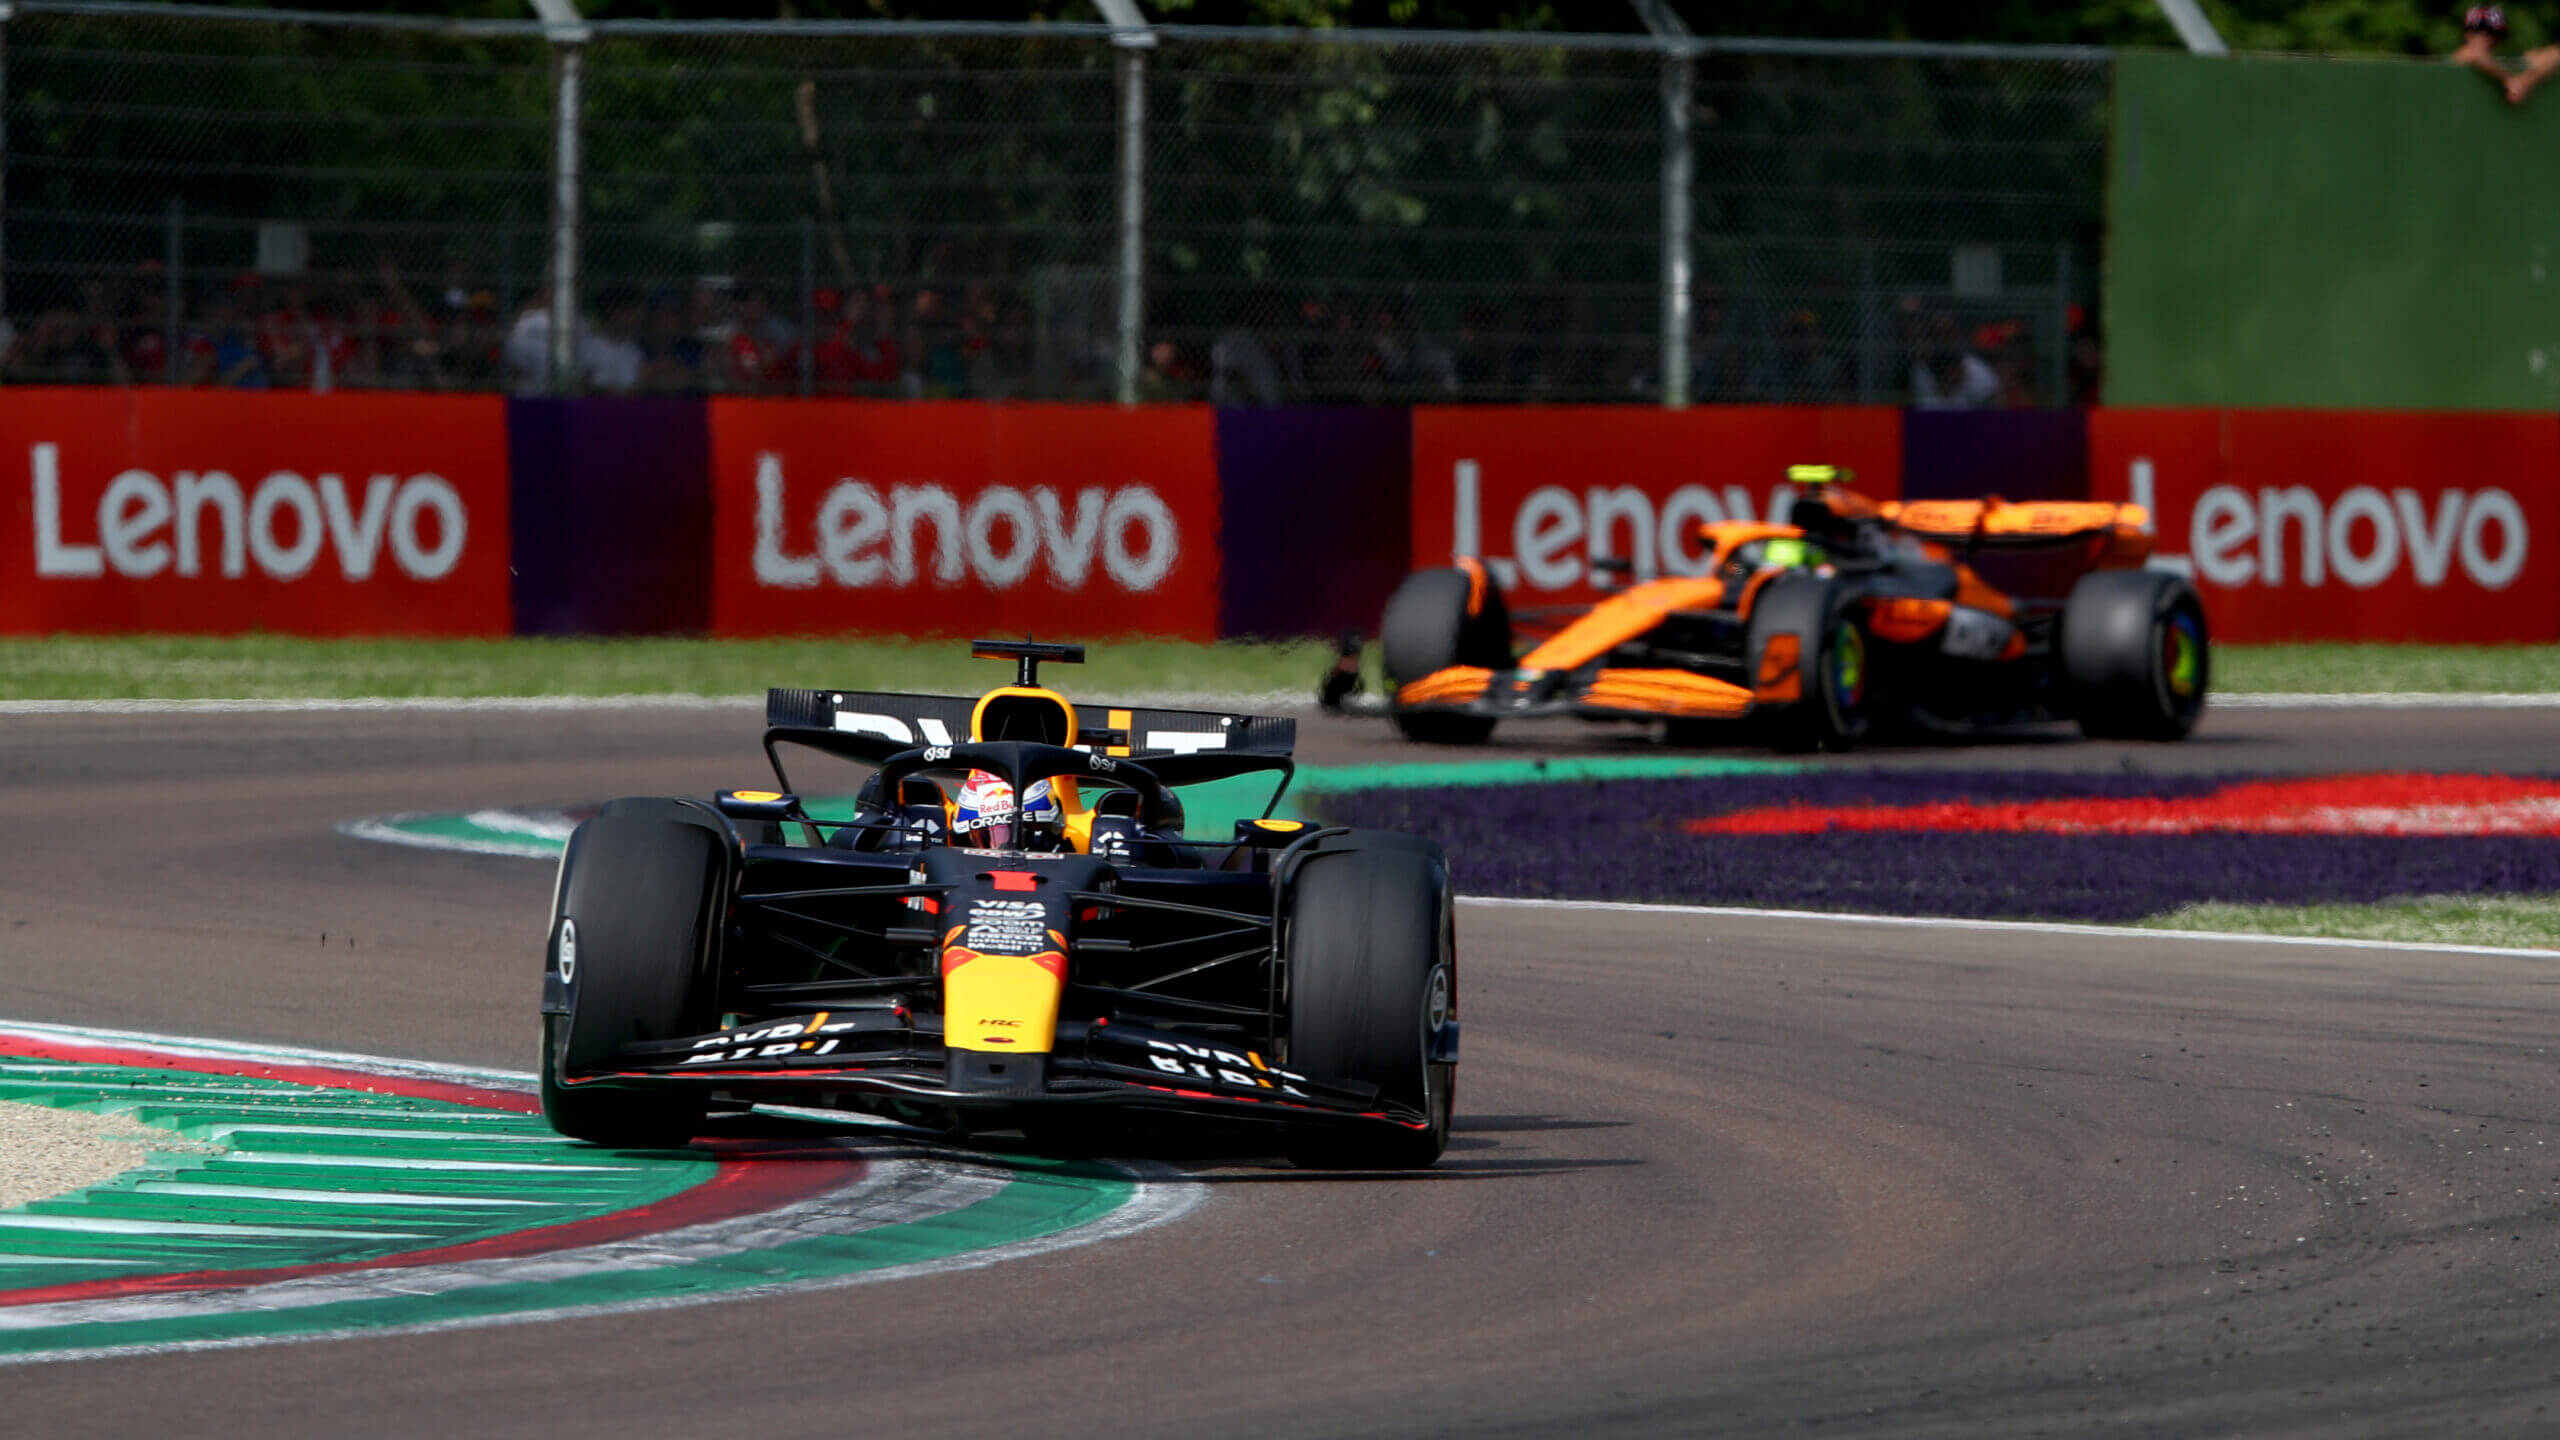 Lando Norris’ charge on Max Verstappen at Imola gives F1 a taste of a fight it craves